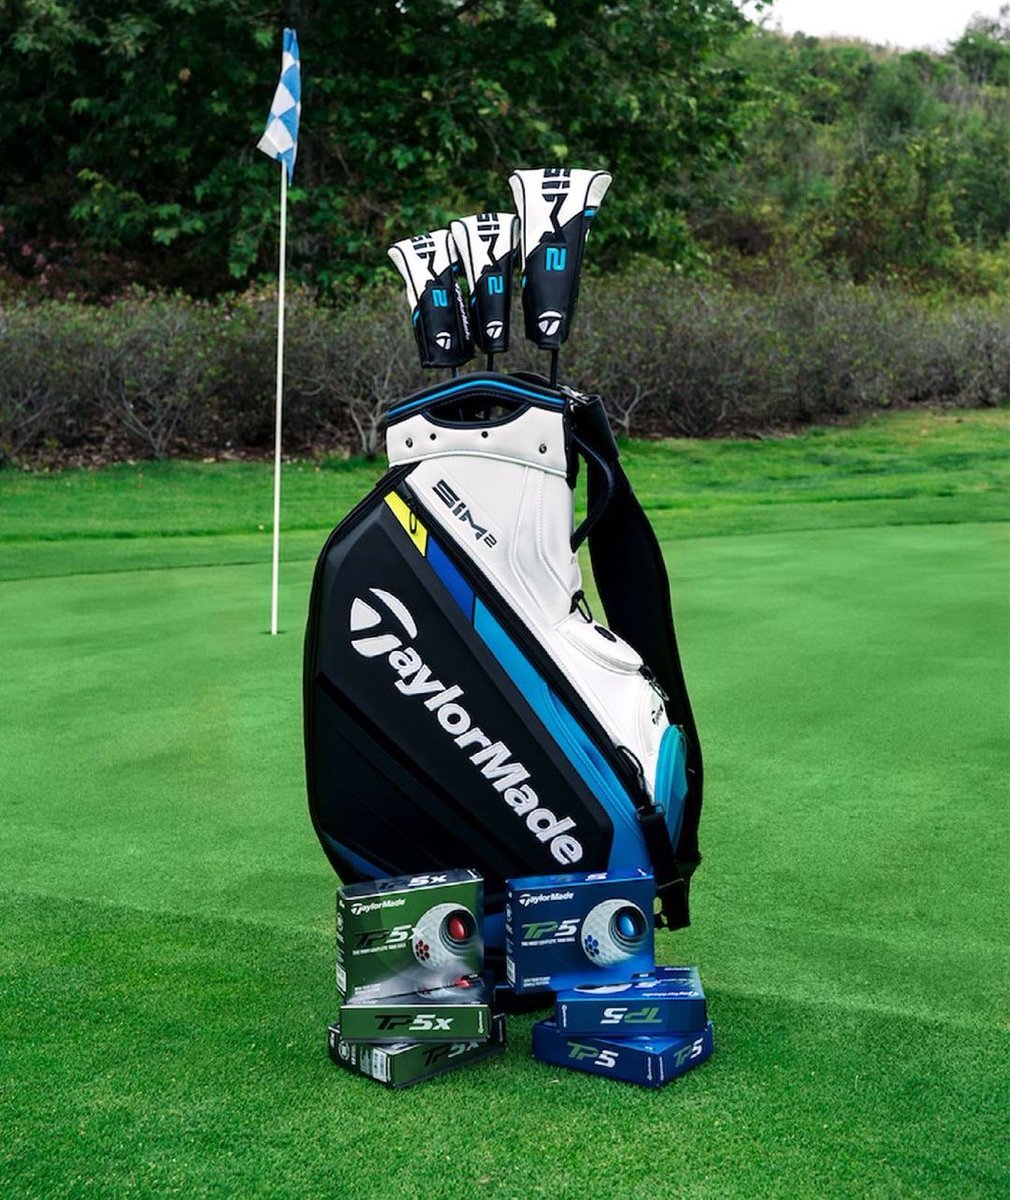 The good people at @TaylorMadeGolf are giving away free gear! I have a SIM2 driver, 2 woods, a staff bag and 6 dozen TP5 or TP5x to be won! 
To enter:
 -Follow @taylormadegolf and me
-Tag 3 friends before midnight Sunday

TaylorMade will pick a winner. Good luck! #TeamTaylorMade